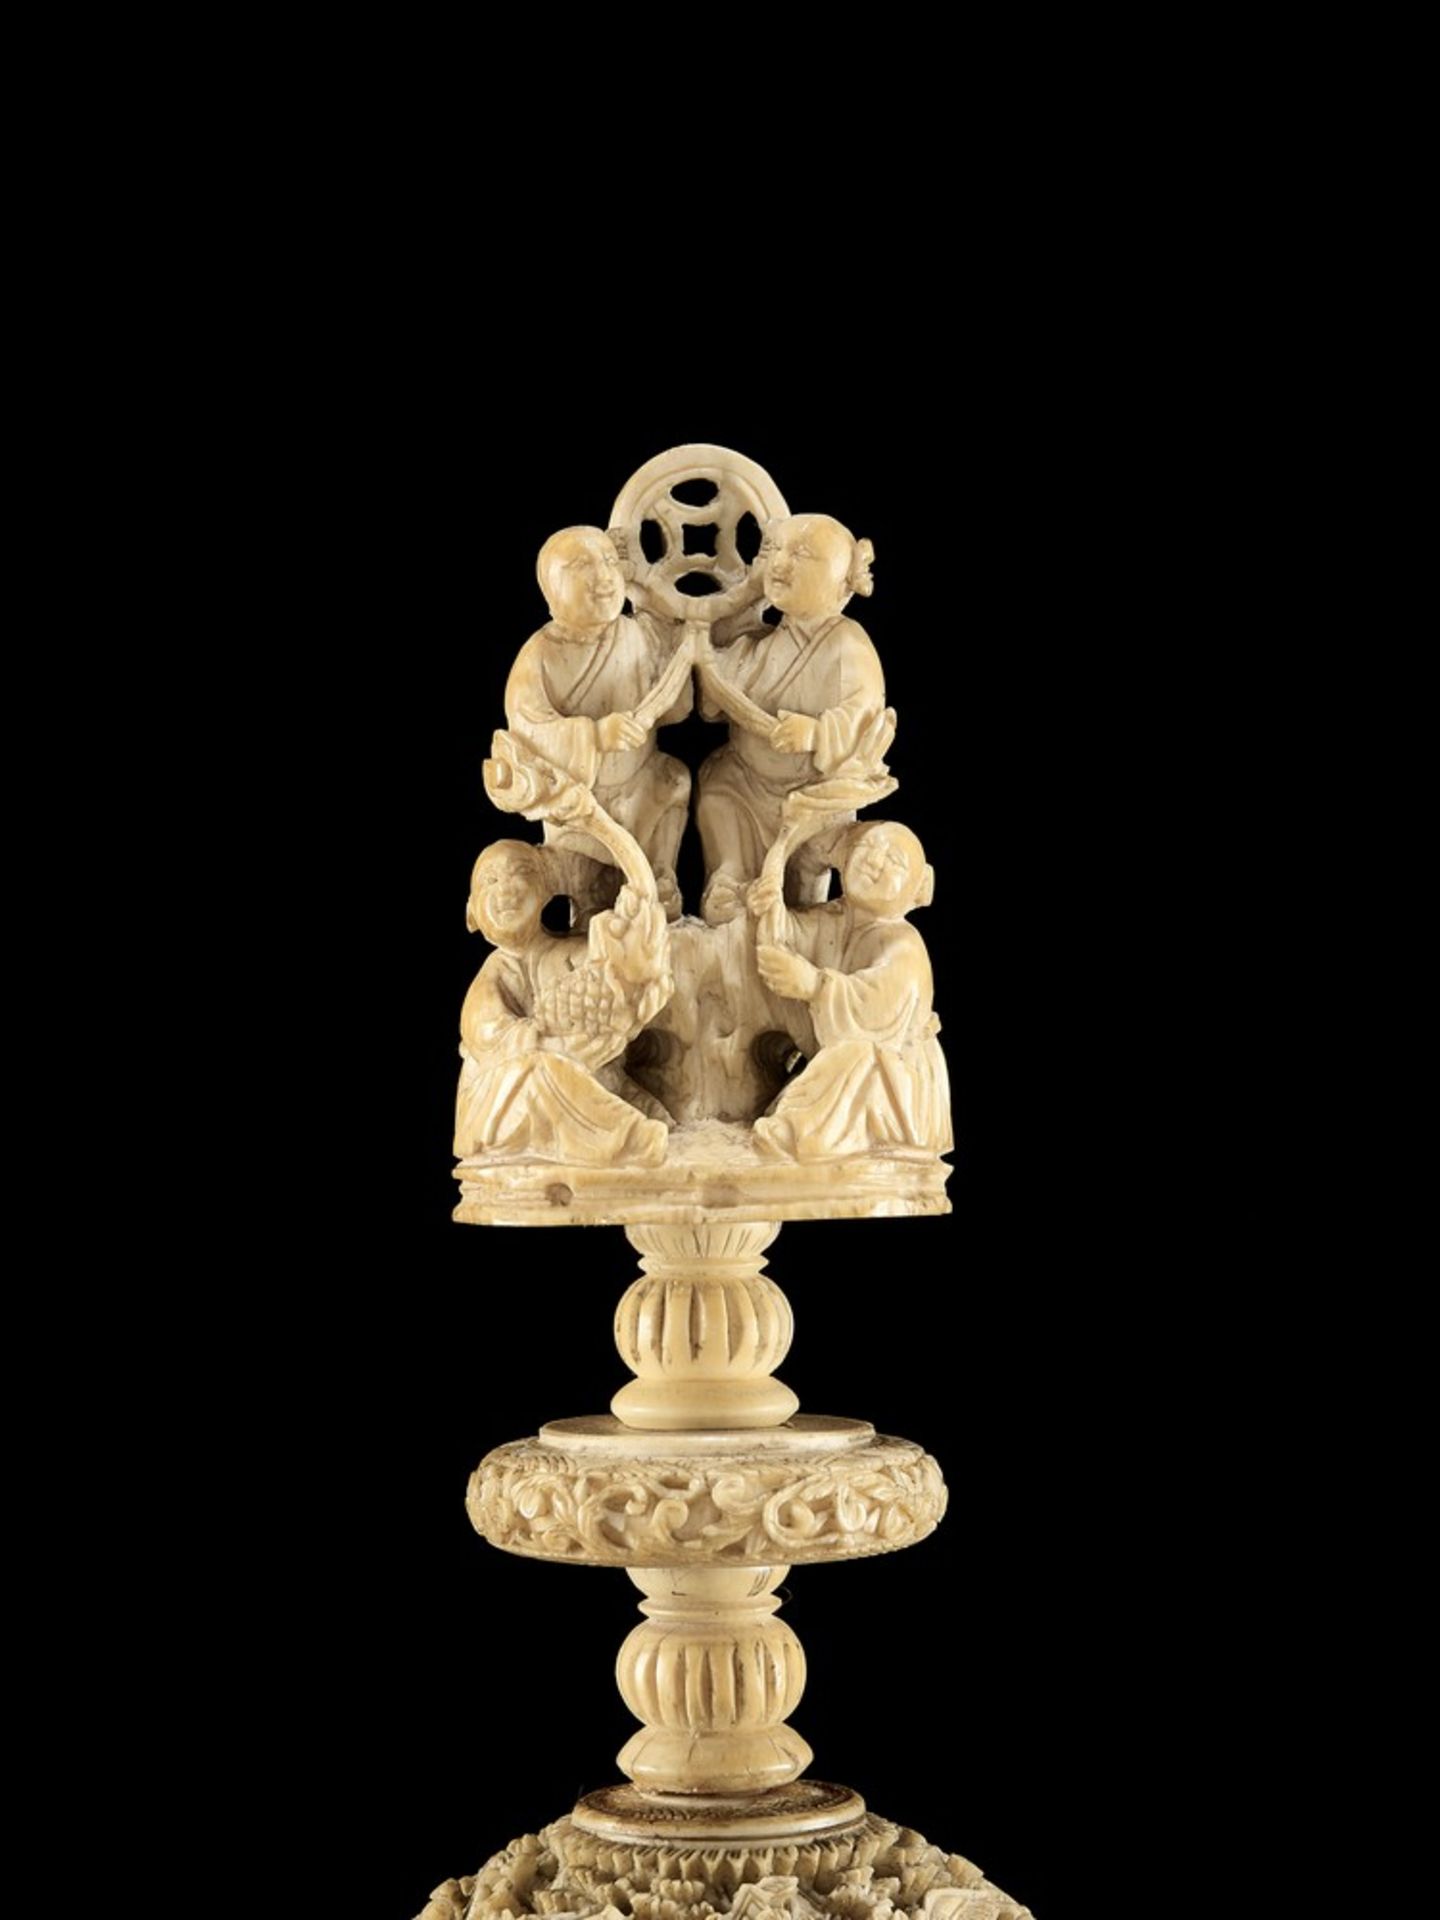 A CANTON SCHOOL 'MAGIC' IVORY BALL ON A TALL STAND, QING DYNASTY - Image 3 of 13